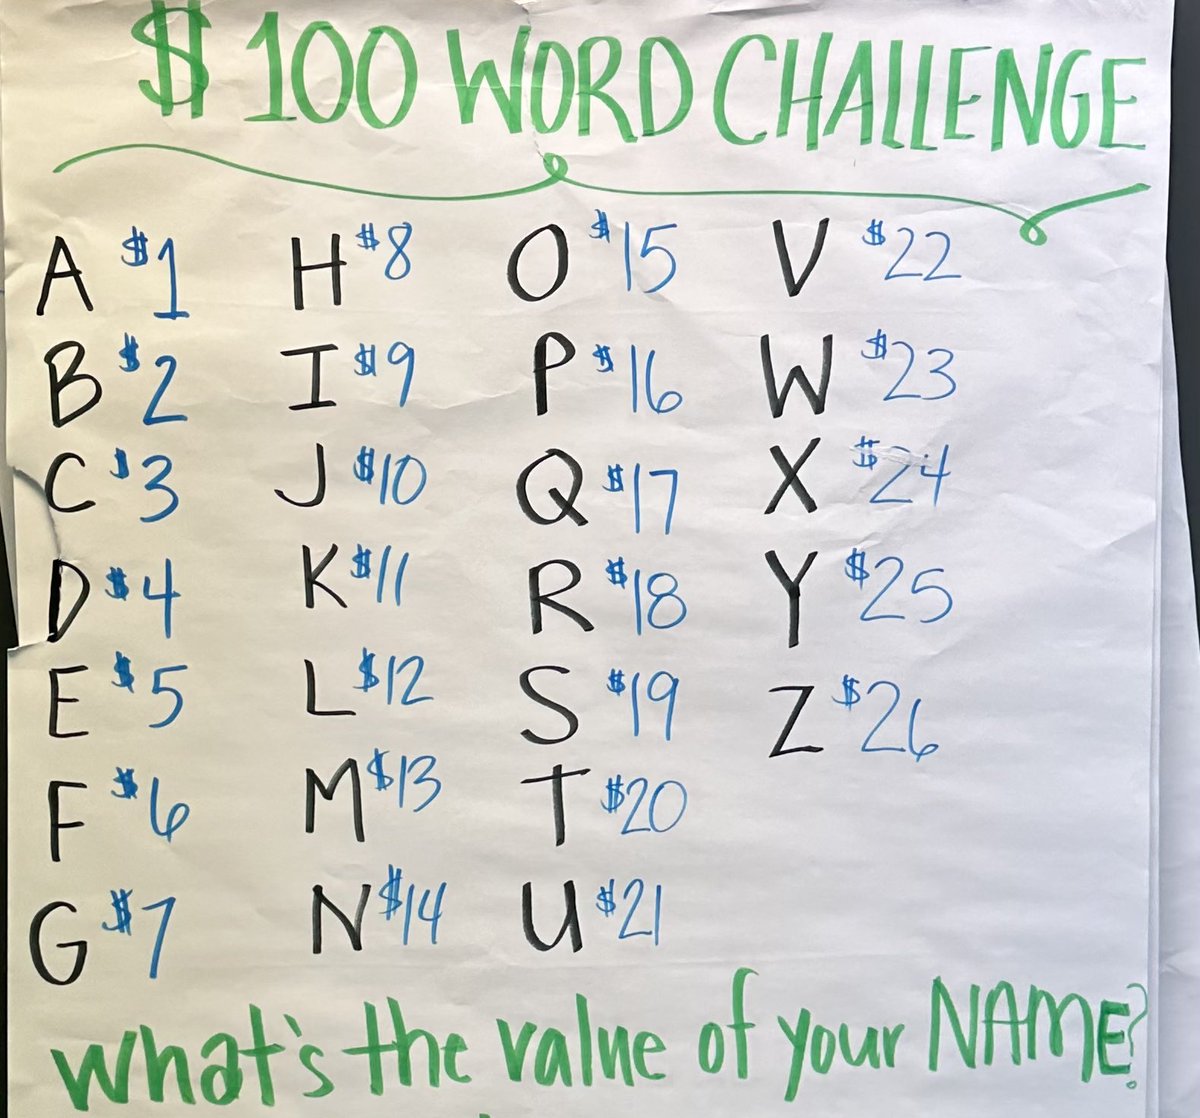 Can you find a word with a value of $100? My 4th graders found two- “elephants” & “Wednesday”! @PleasantUnionYR #$100wordchallenge #acceptthechallenge #ifitdoesntchallengeyouitwontchangeyou